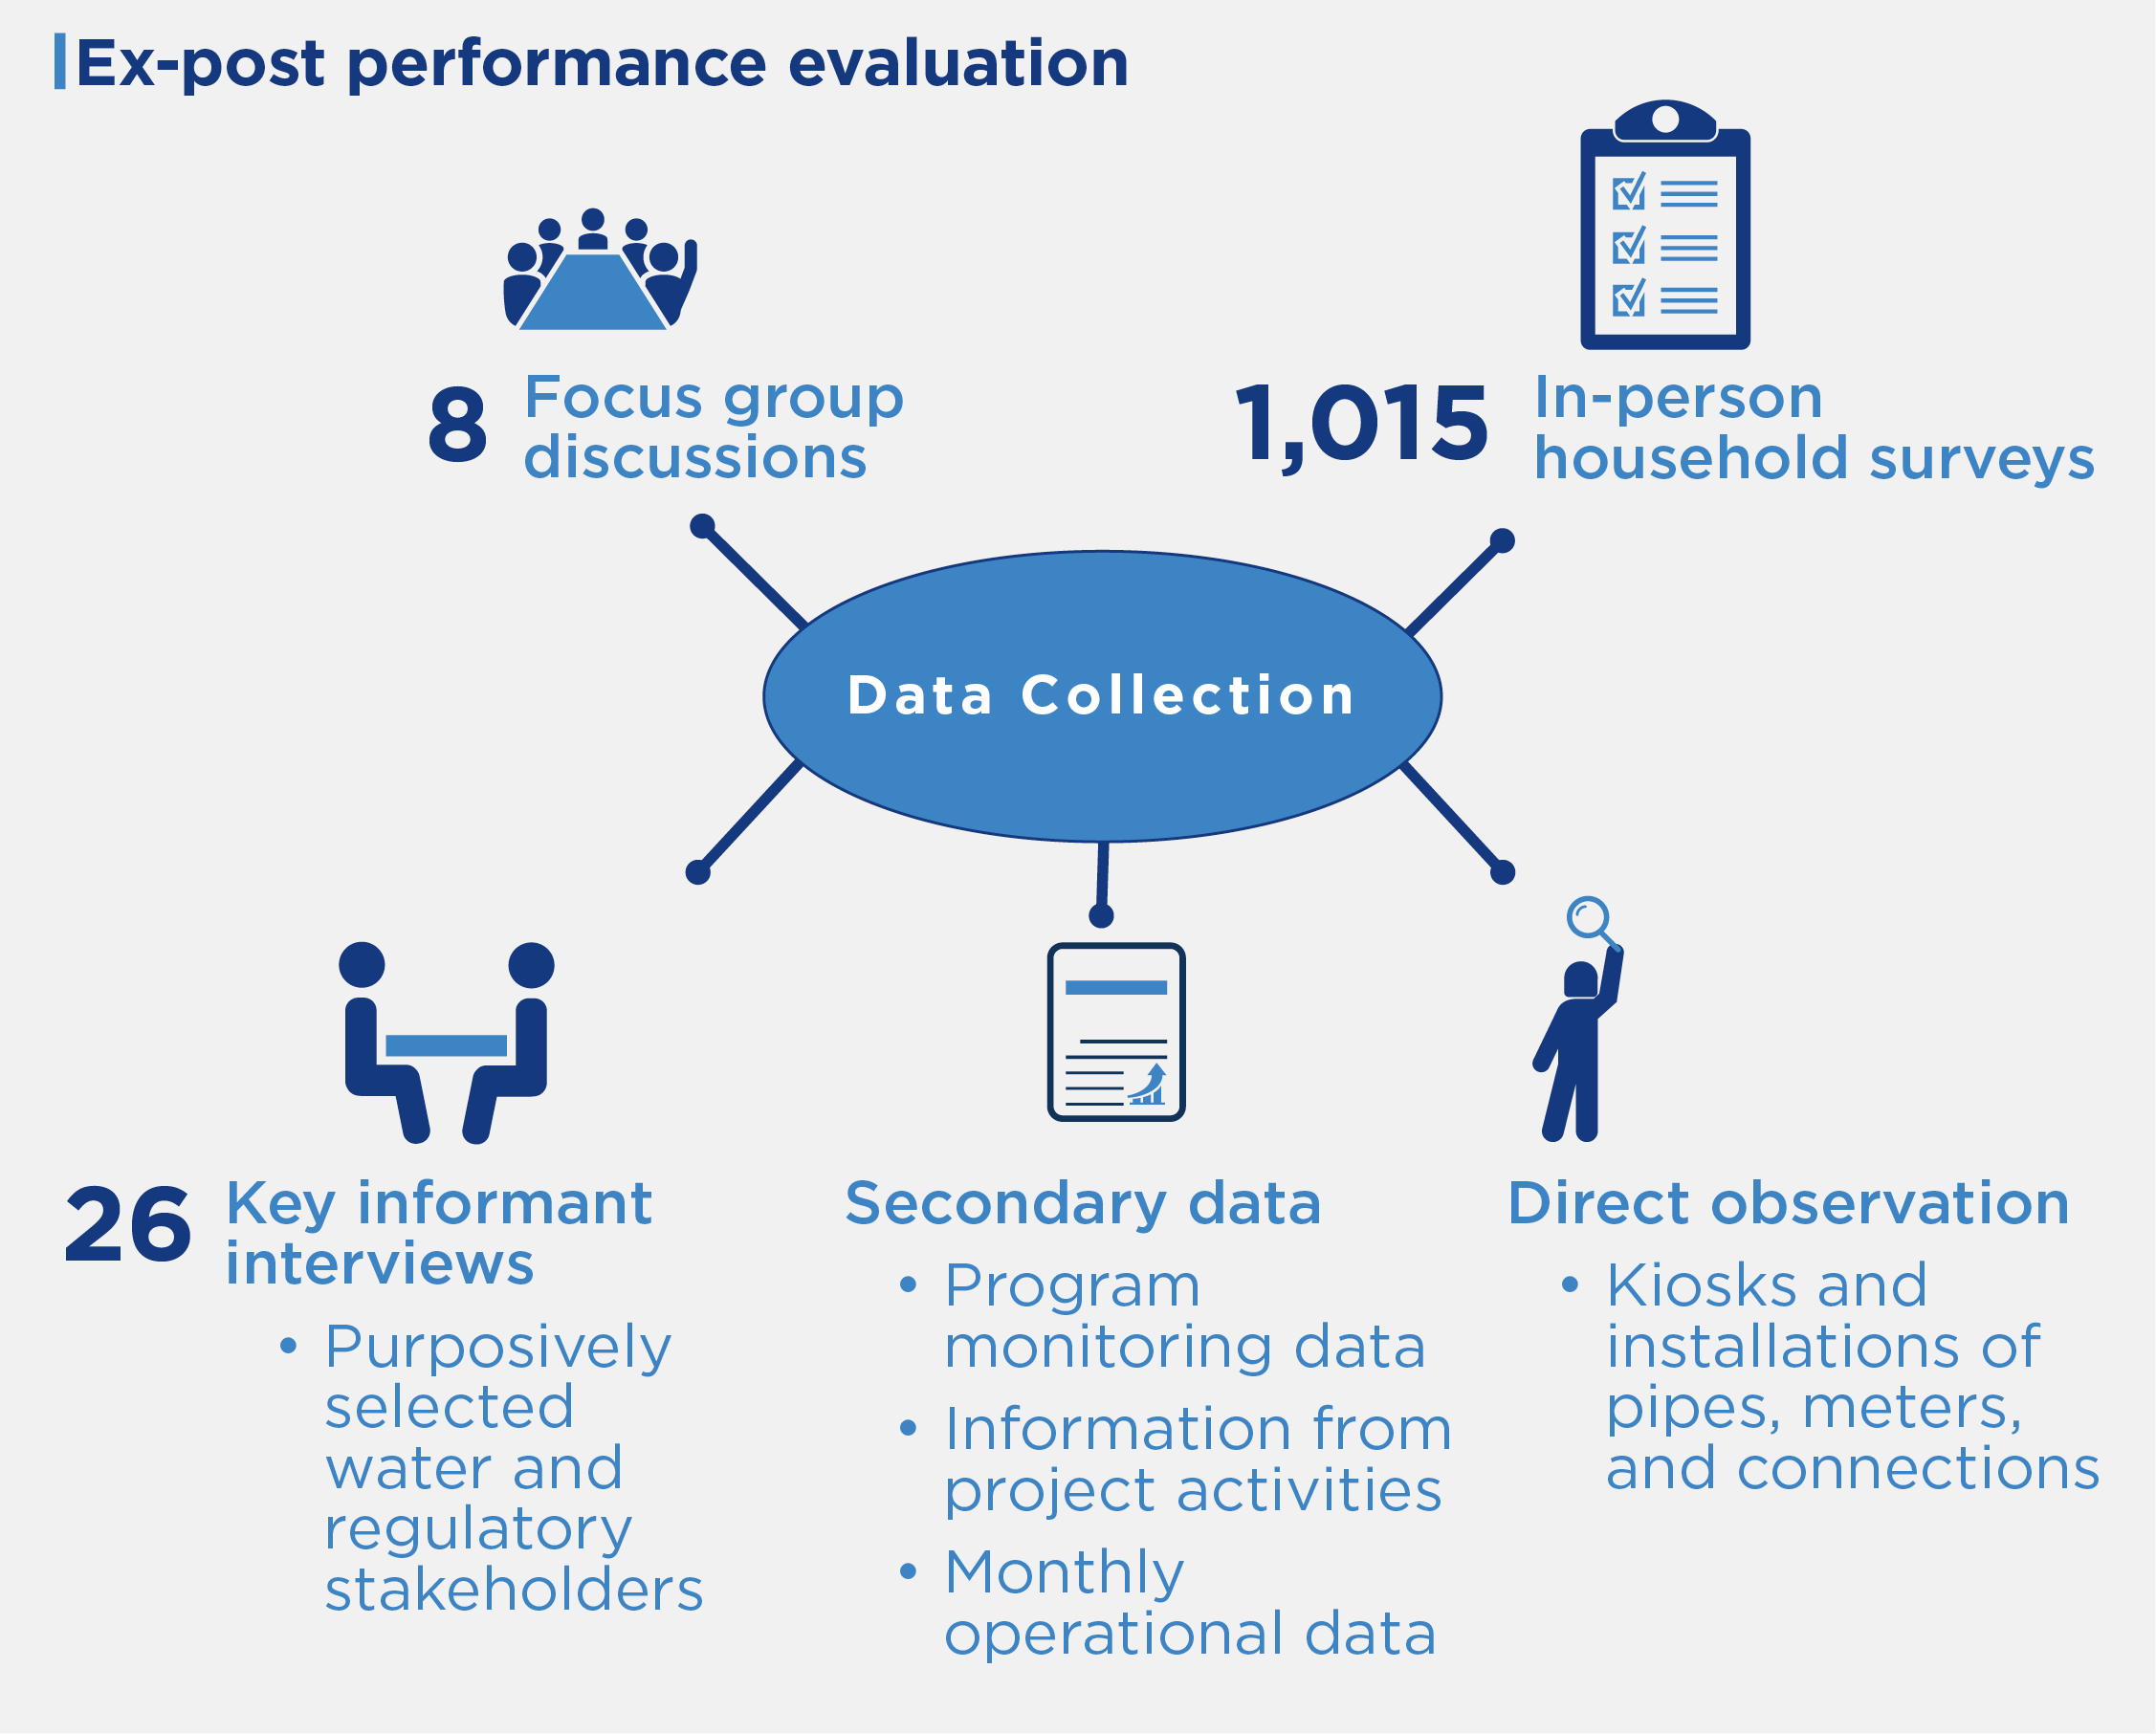 This was an ex-post performance evaluation. Data collection consisted of 8 focus group discussions, 1,015 in-person household surveys, 26 key informant interviews, secondary data, and direct observation.